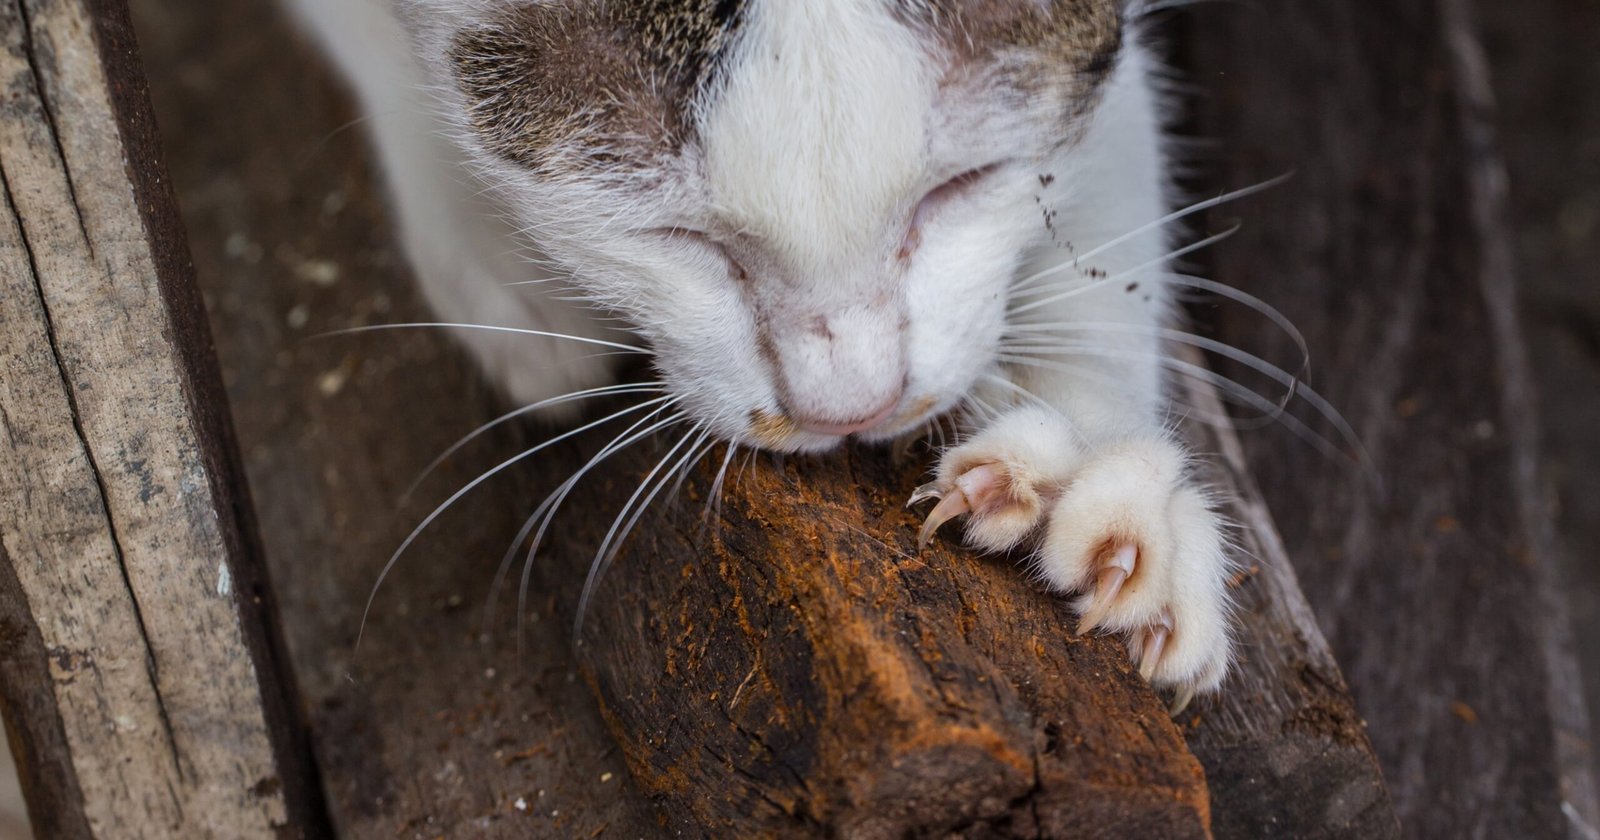 How To Care For A Declawed Cat